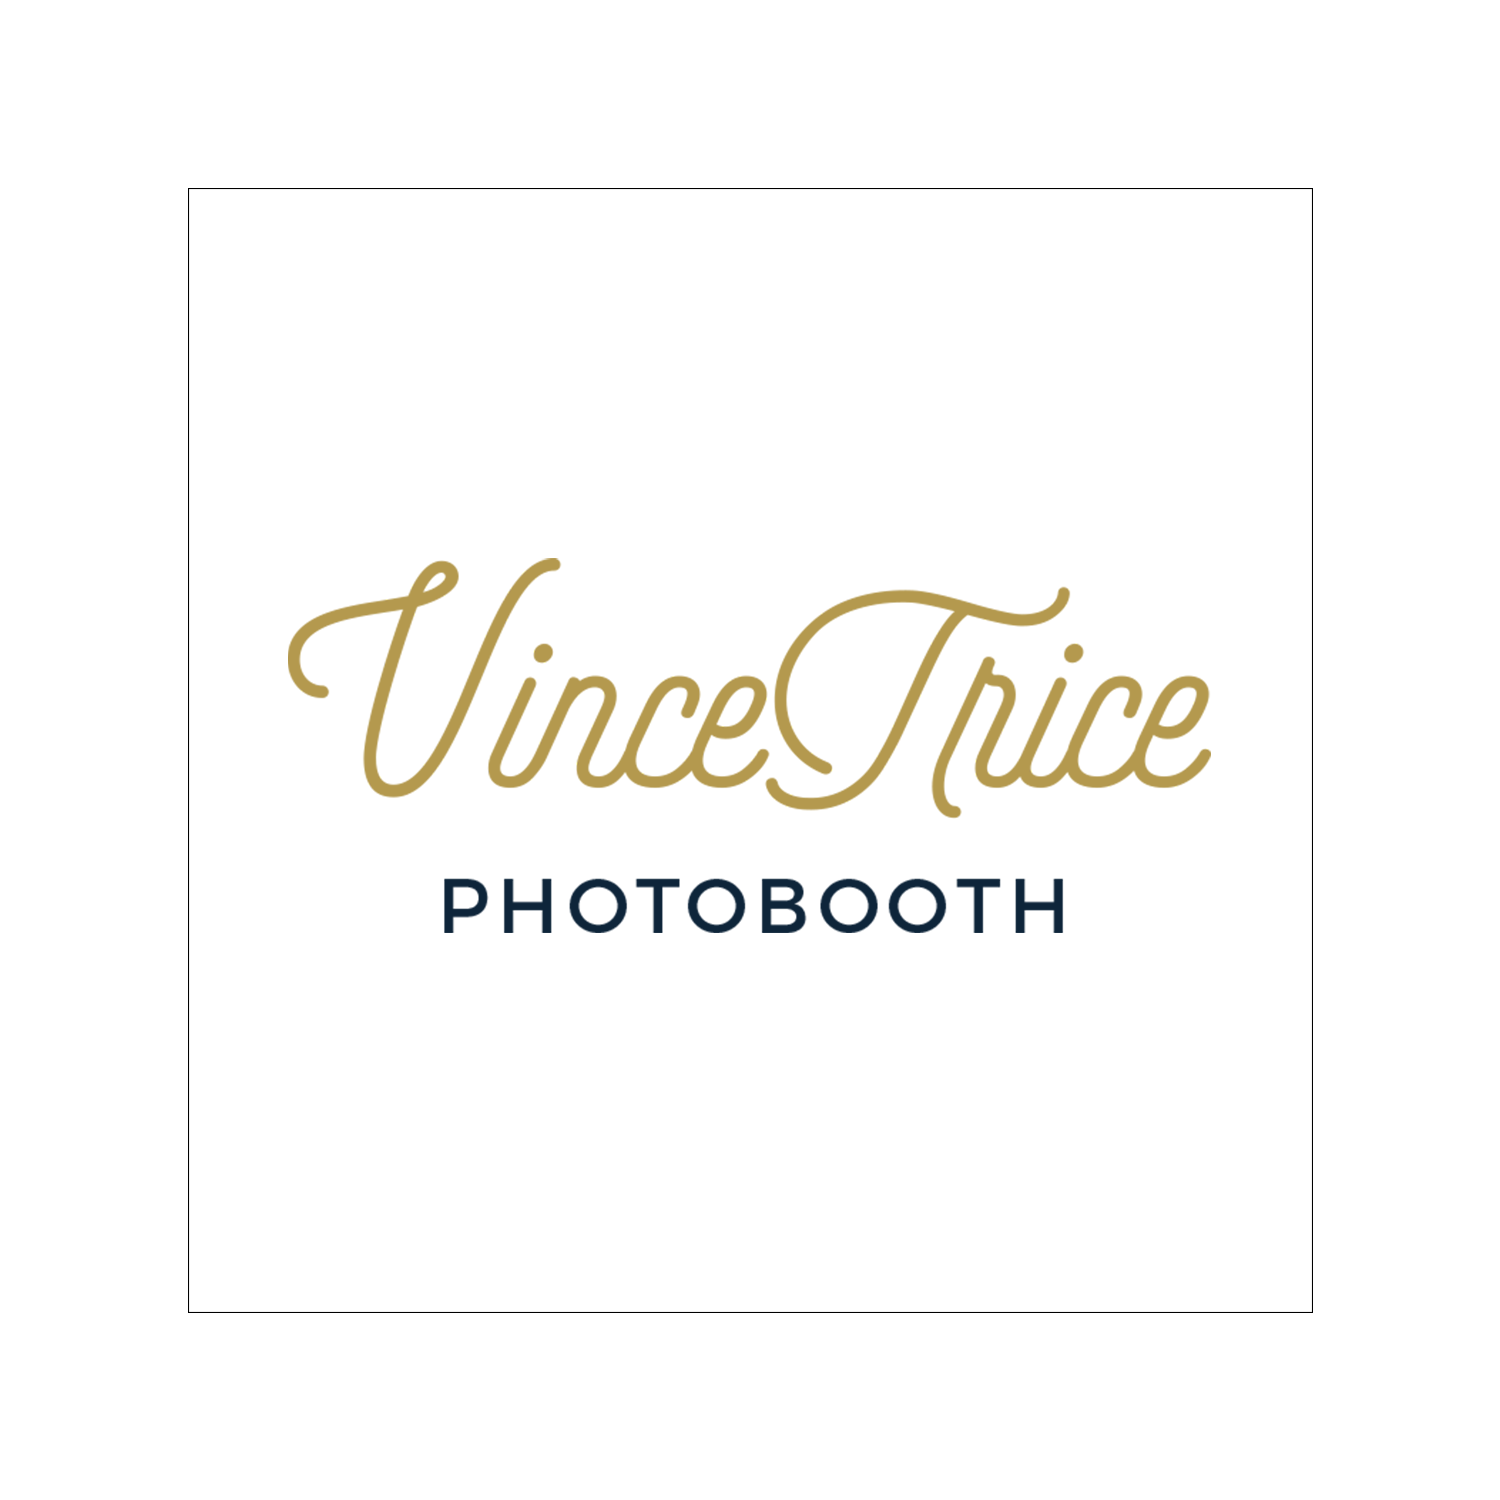 VinceTrice PhotoBooth